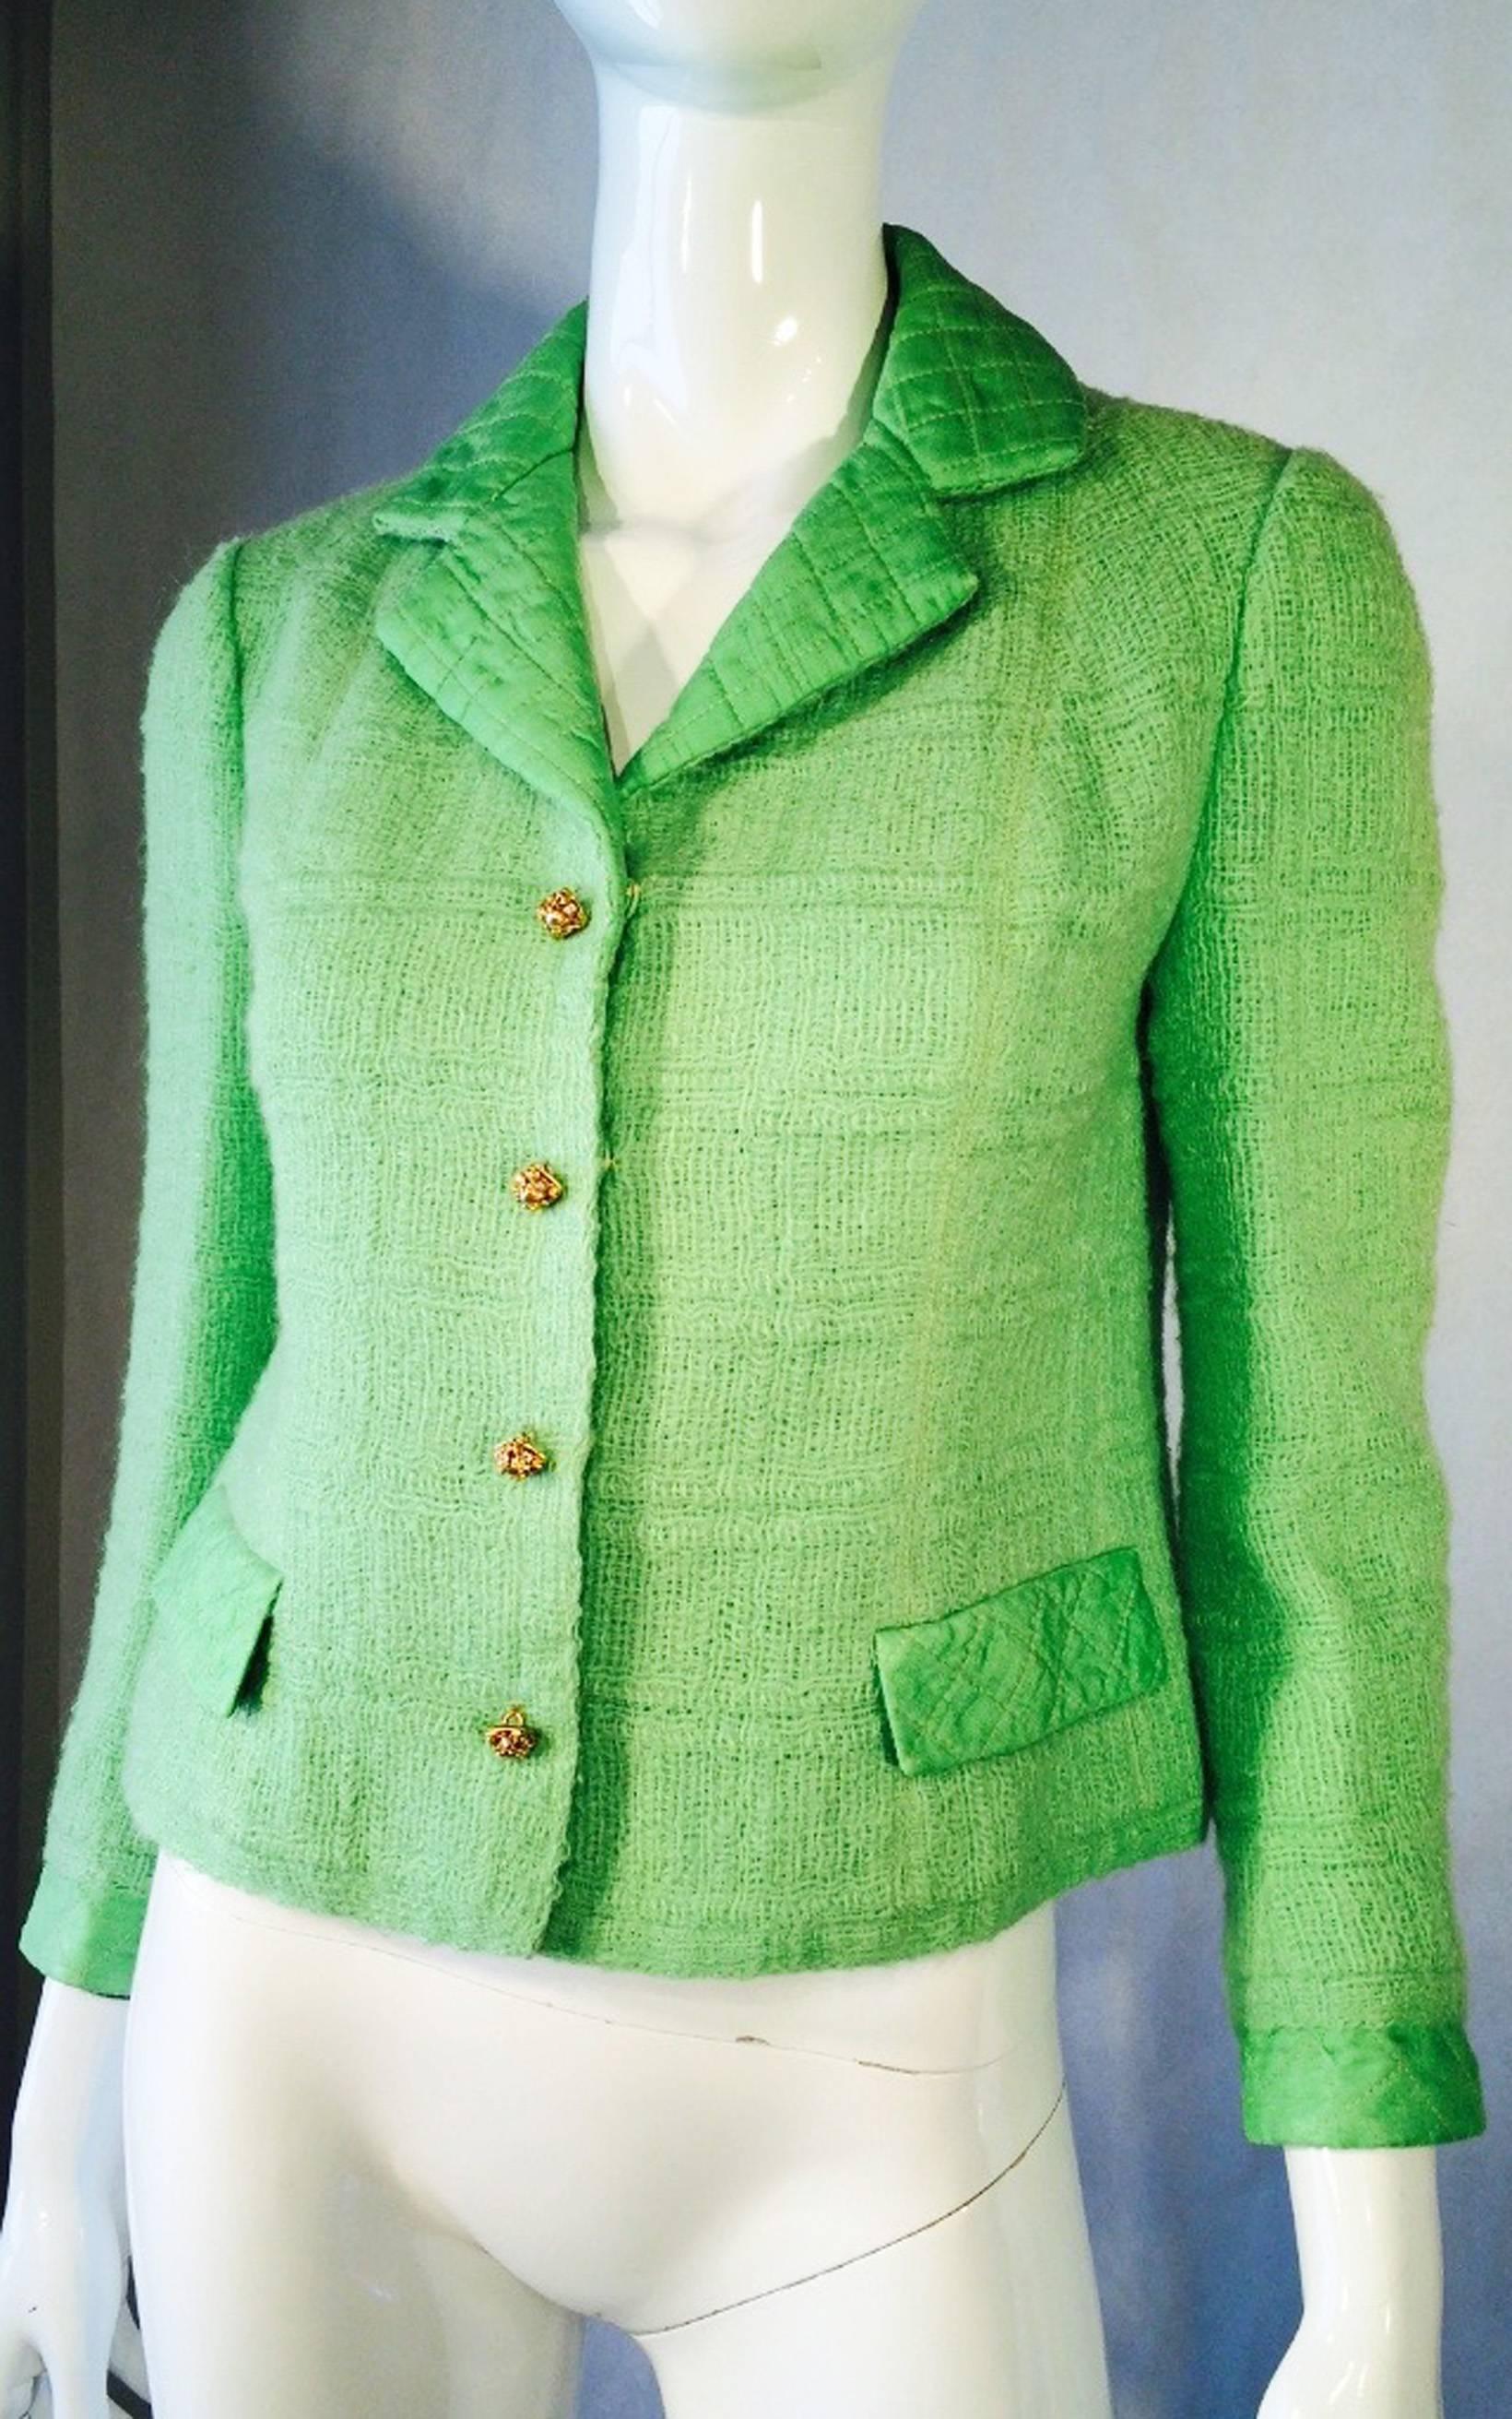 A fine and rare vintage Capucine jacket. Vivid pistachio green wool item trimmed with matching color quilted silk collar, cuffs and pocket flaps. Item features hidden snap closures and exquisite gilt filigree buttons with crystals and faux baroque